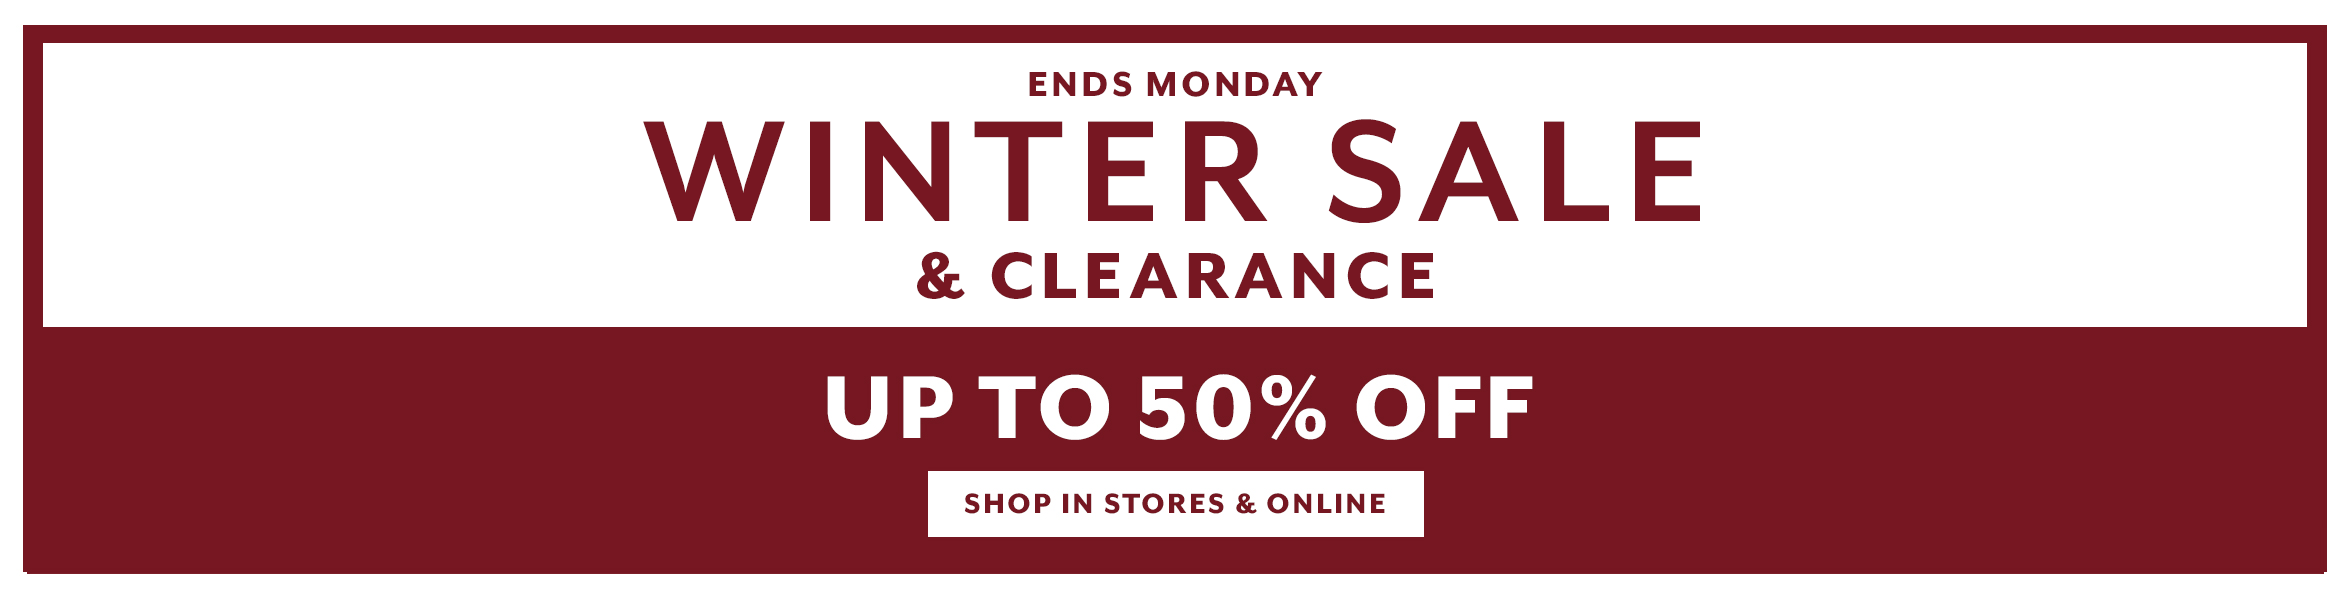 Ends Monday Winter Sale & Clearance up to 50% off, shop in stores and online